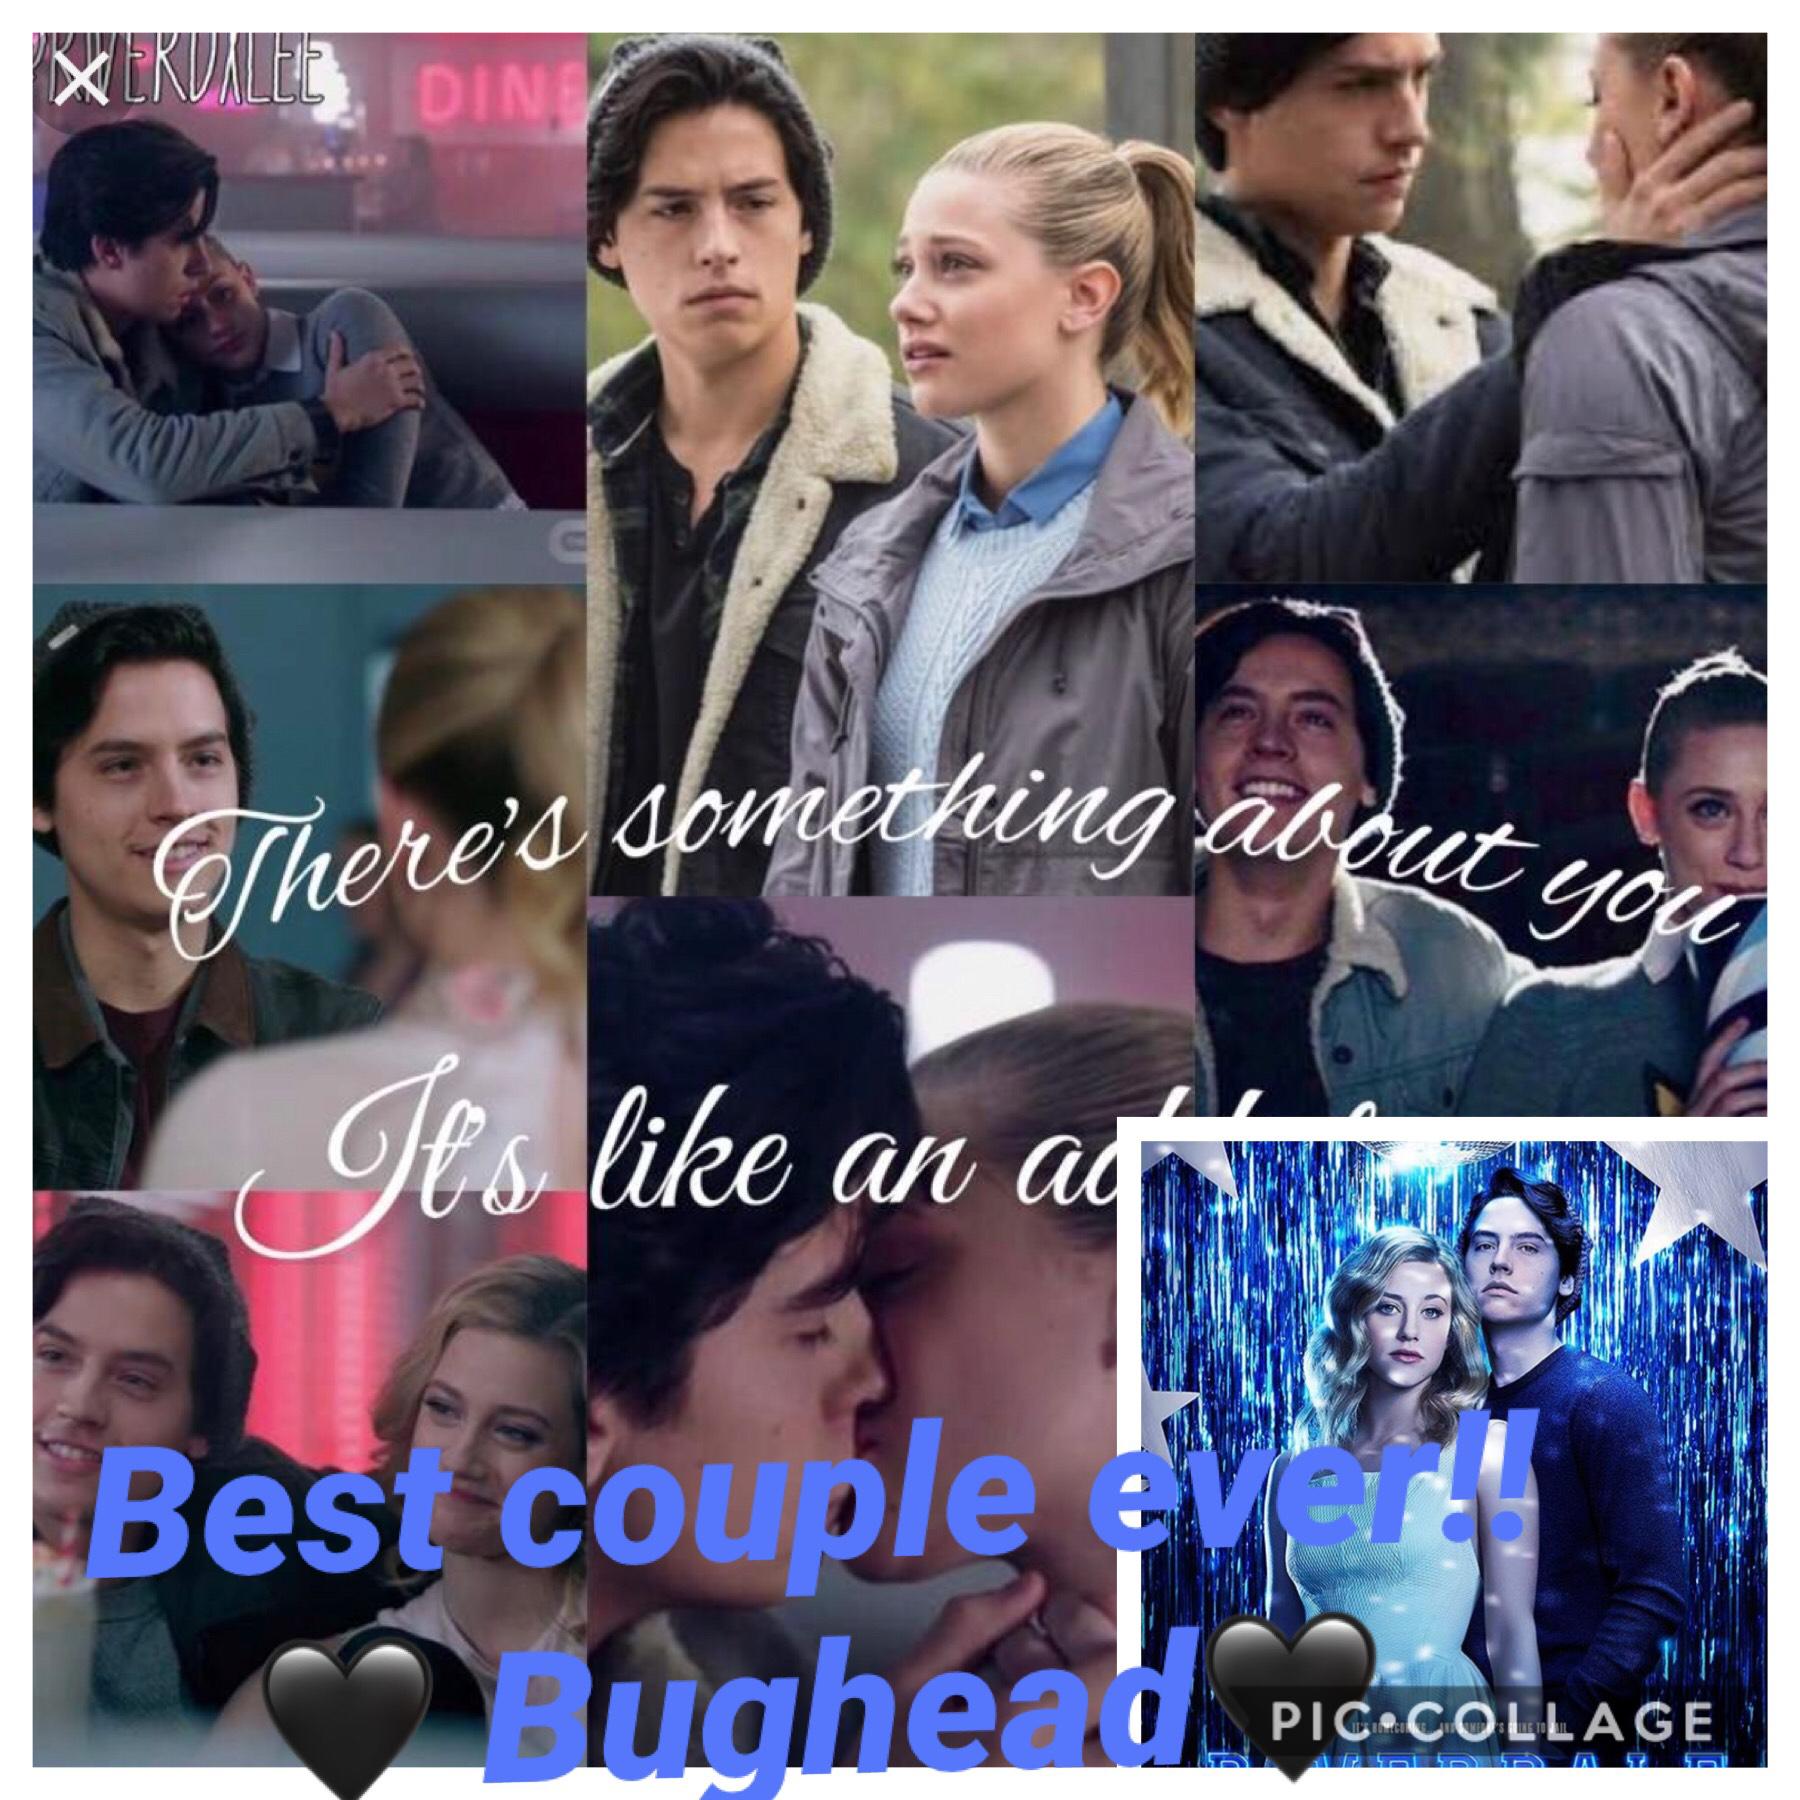 There are the cutest couple ever like if agree🖤🖤🖤 They are dating in real life if u people didn't know!!! GO TEAM BUGHEAD!!!!!!!!!!!🖤🖤🖤🖤🖤